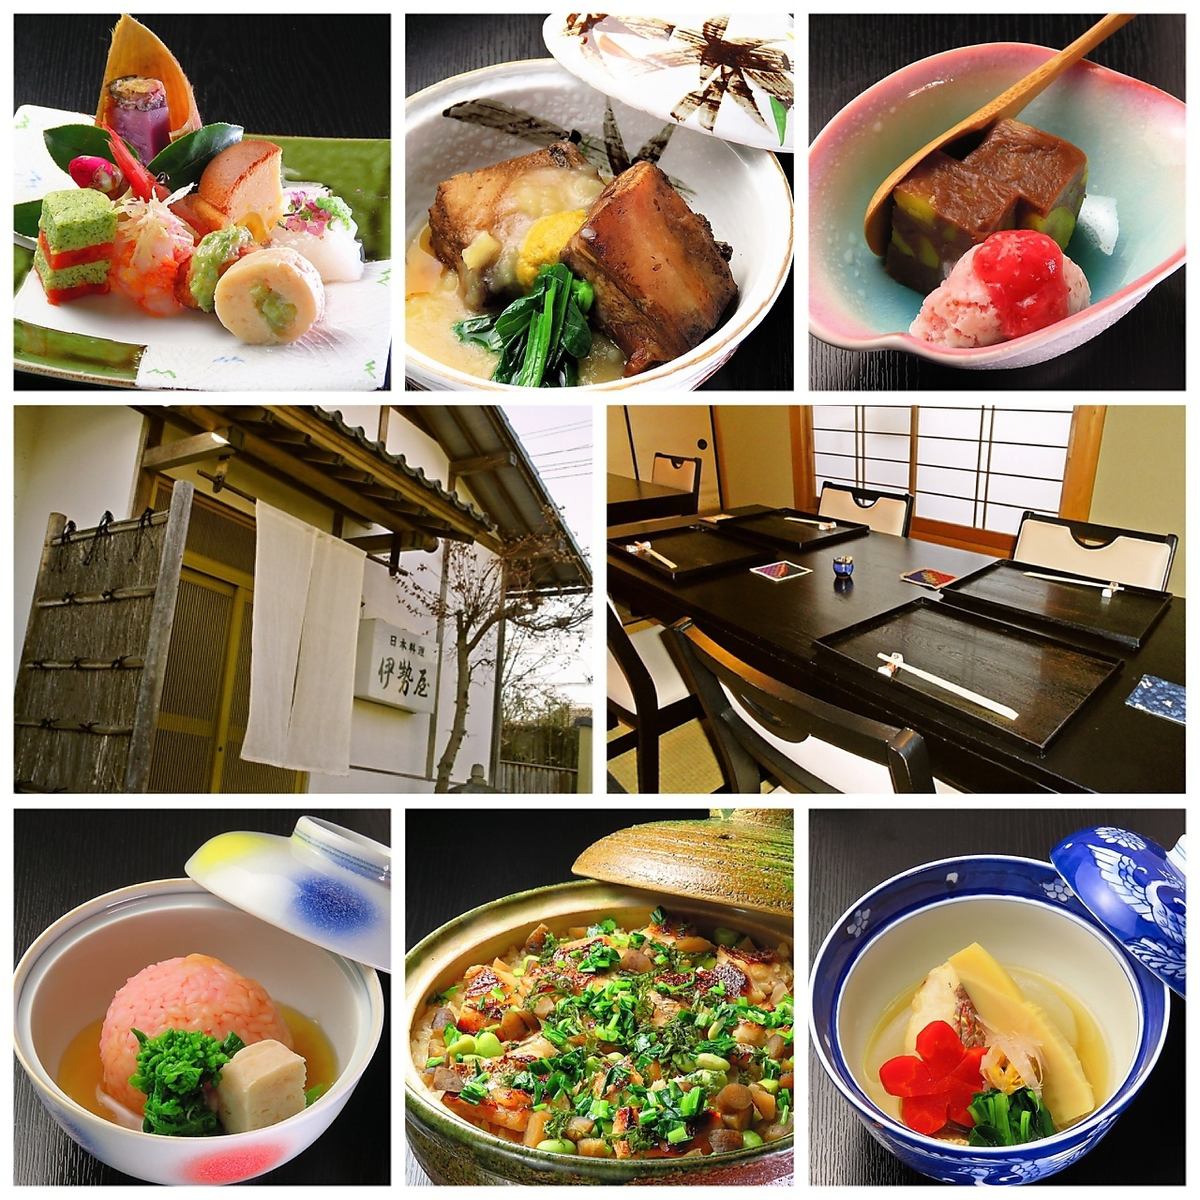 This restaurant serves authentic kaiseki and Japanese cuisine made with natural ingredients, run by an owner who has trained in authentic Kyoto cuisine.